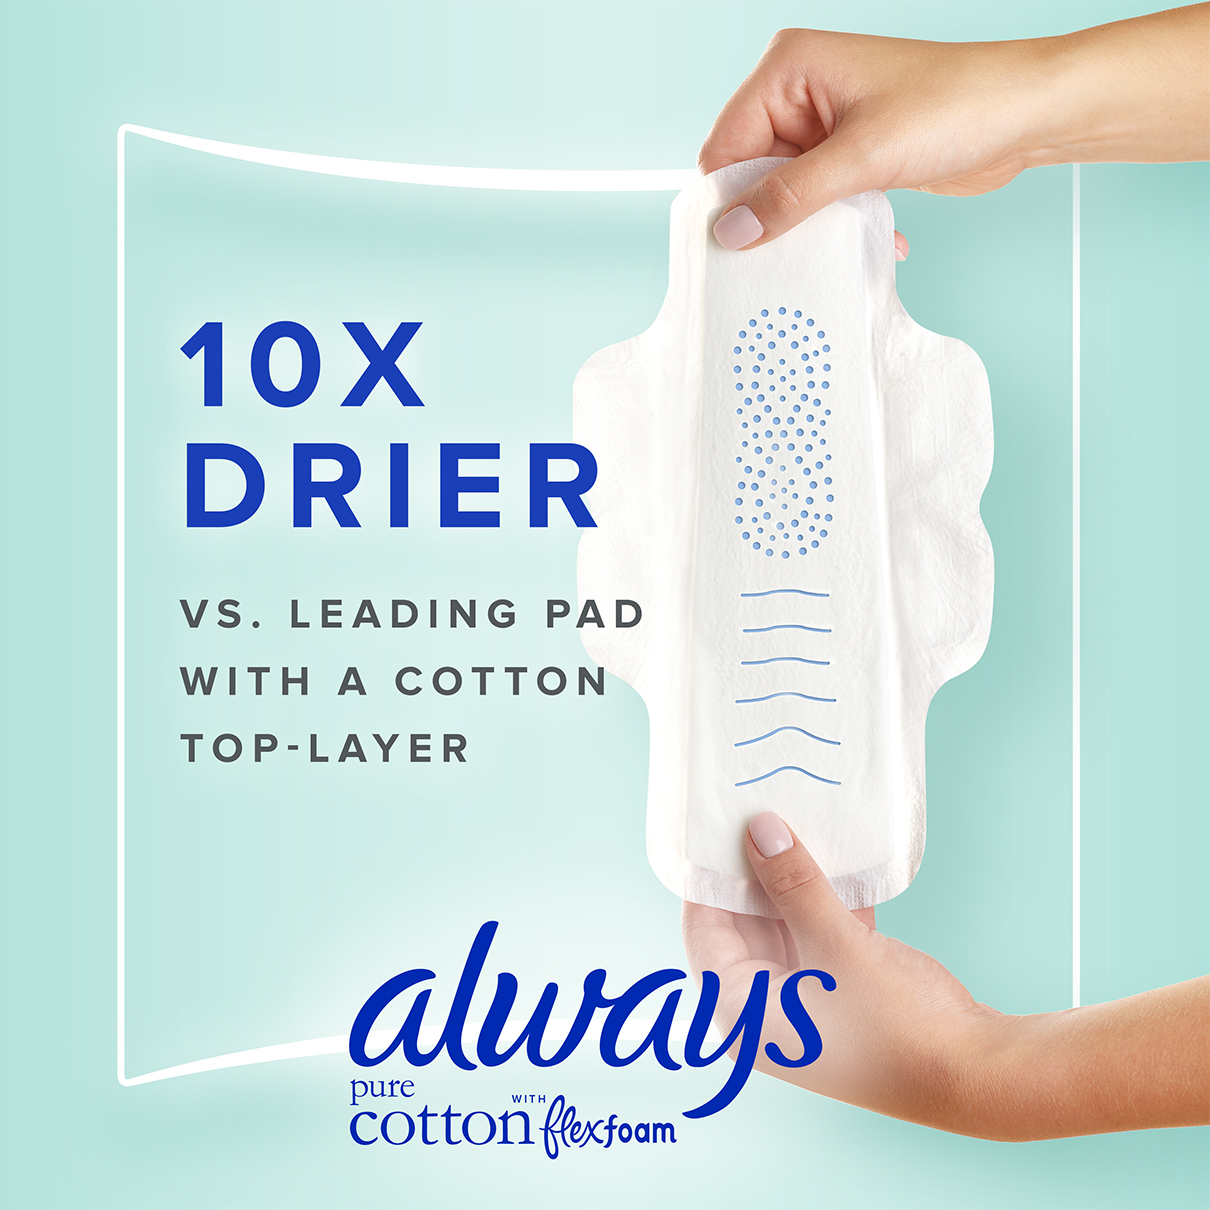 10y Drier vs. Leading Pad WIth A Cotton Top-Layer